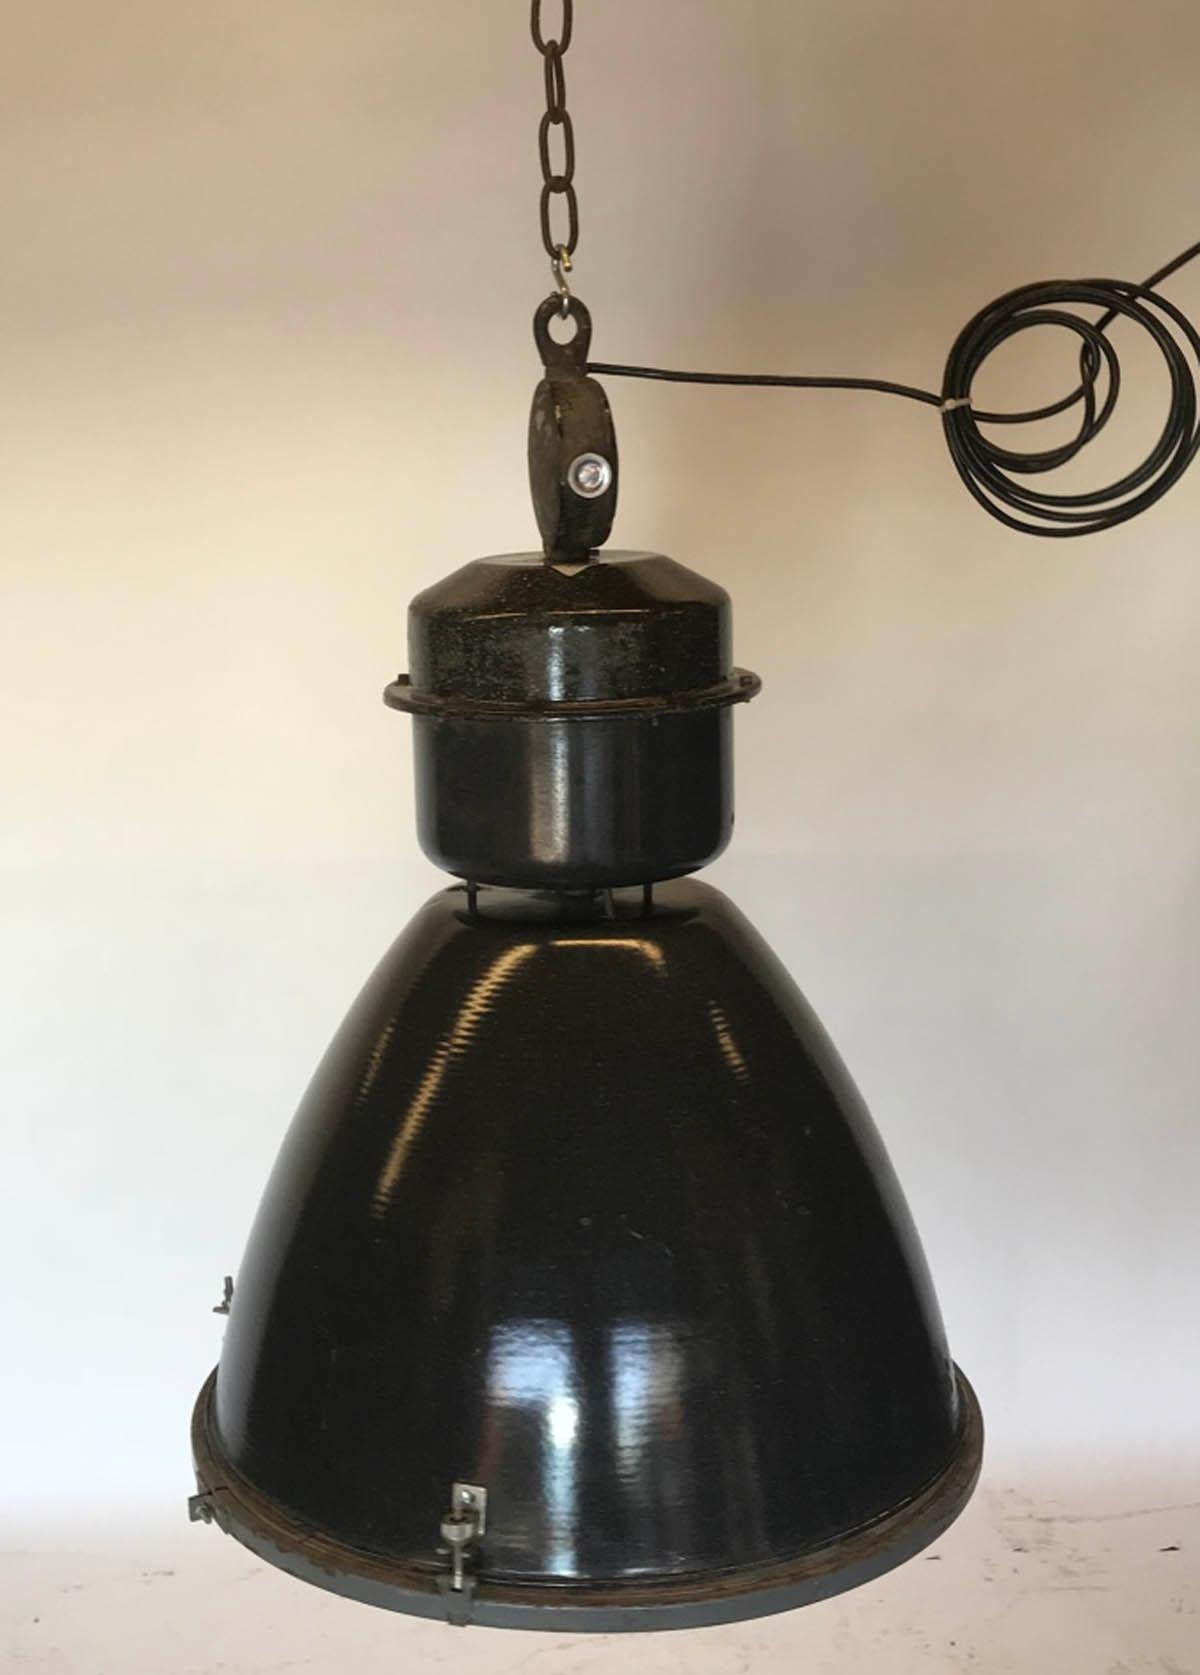 Very similar Industrial factory pendant lights, in black/grey enameled steel. Wired and ready to be hung. All sold separately. ONLY TWO AVAILABLE